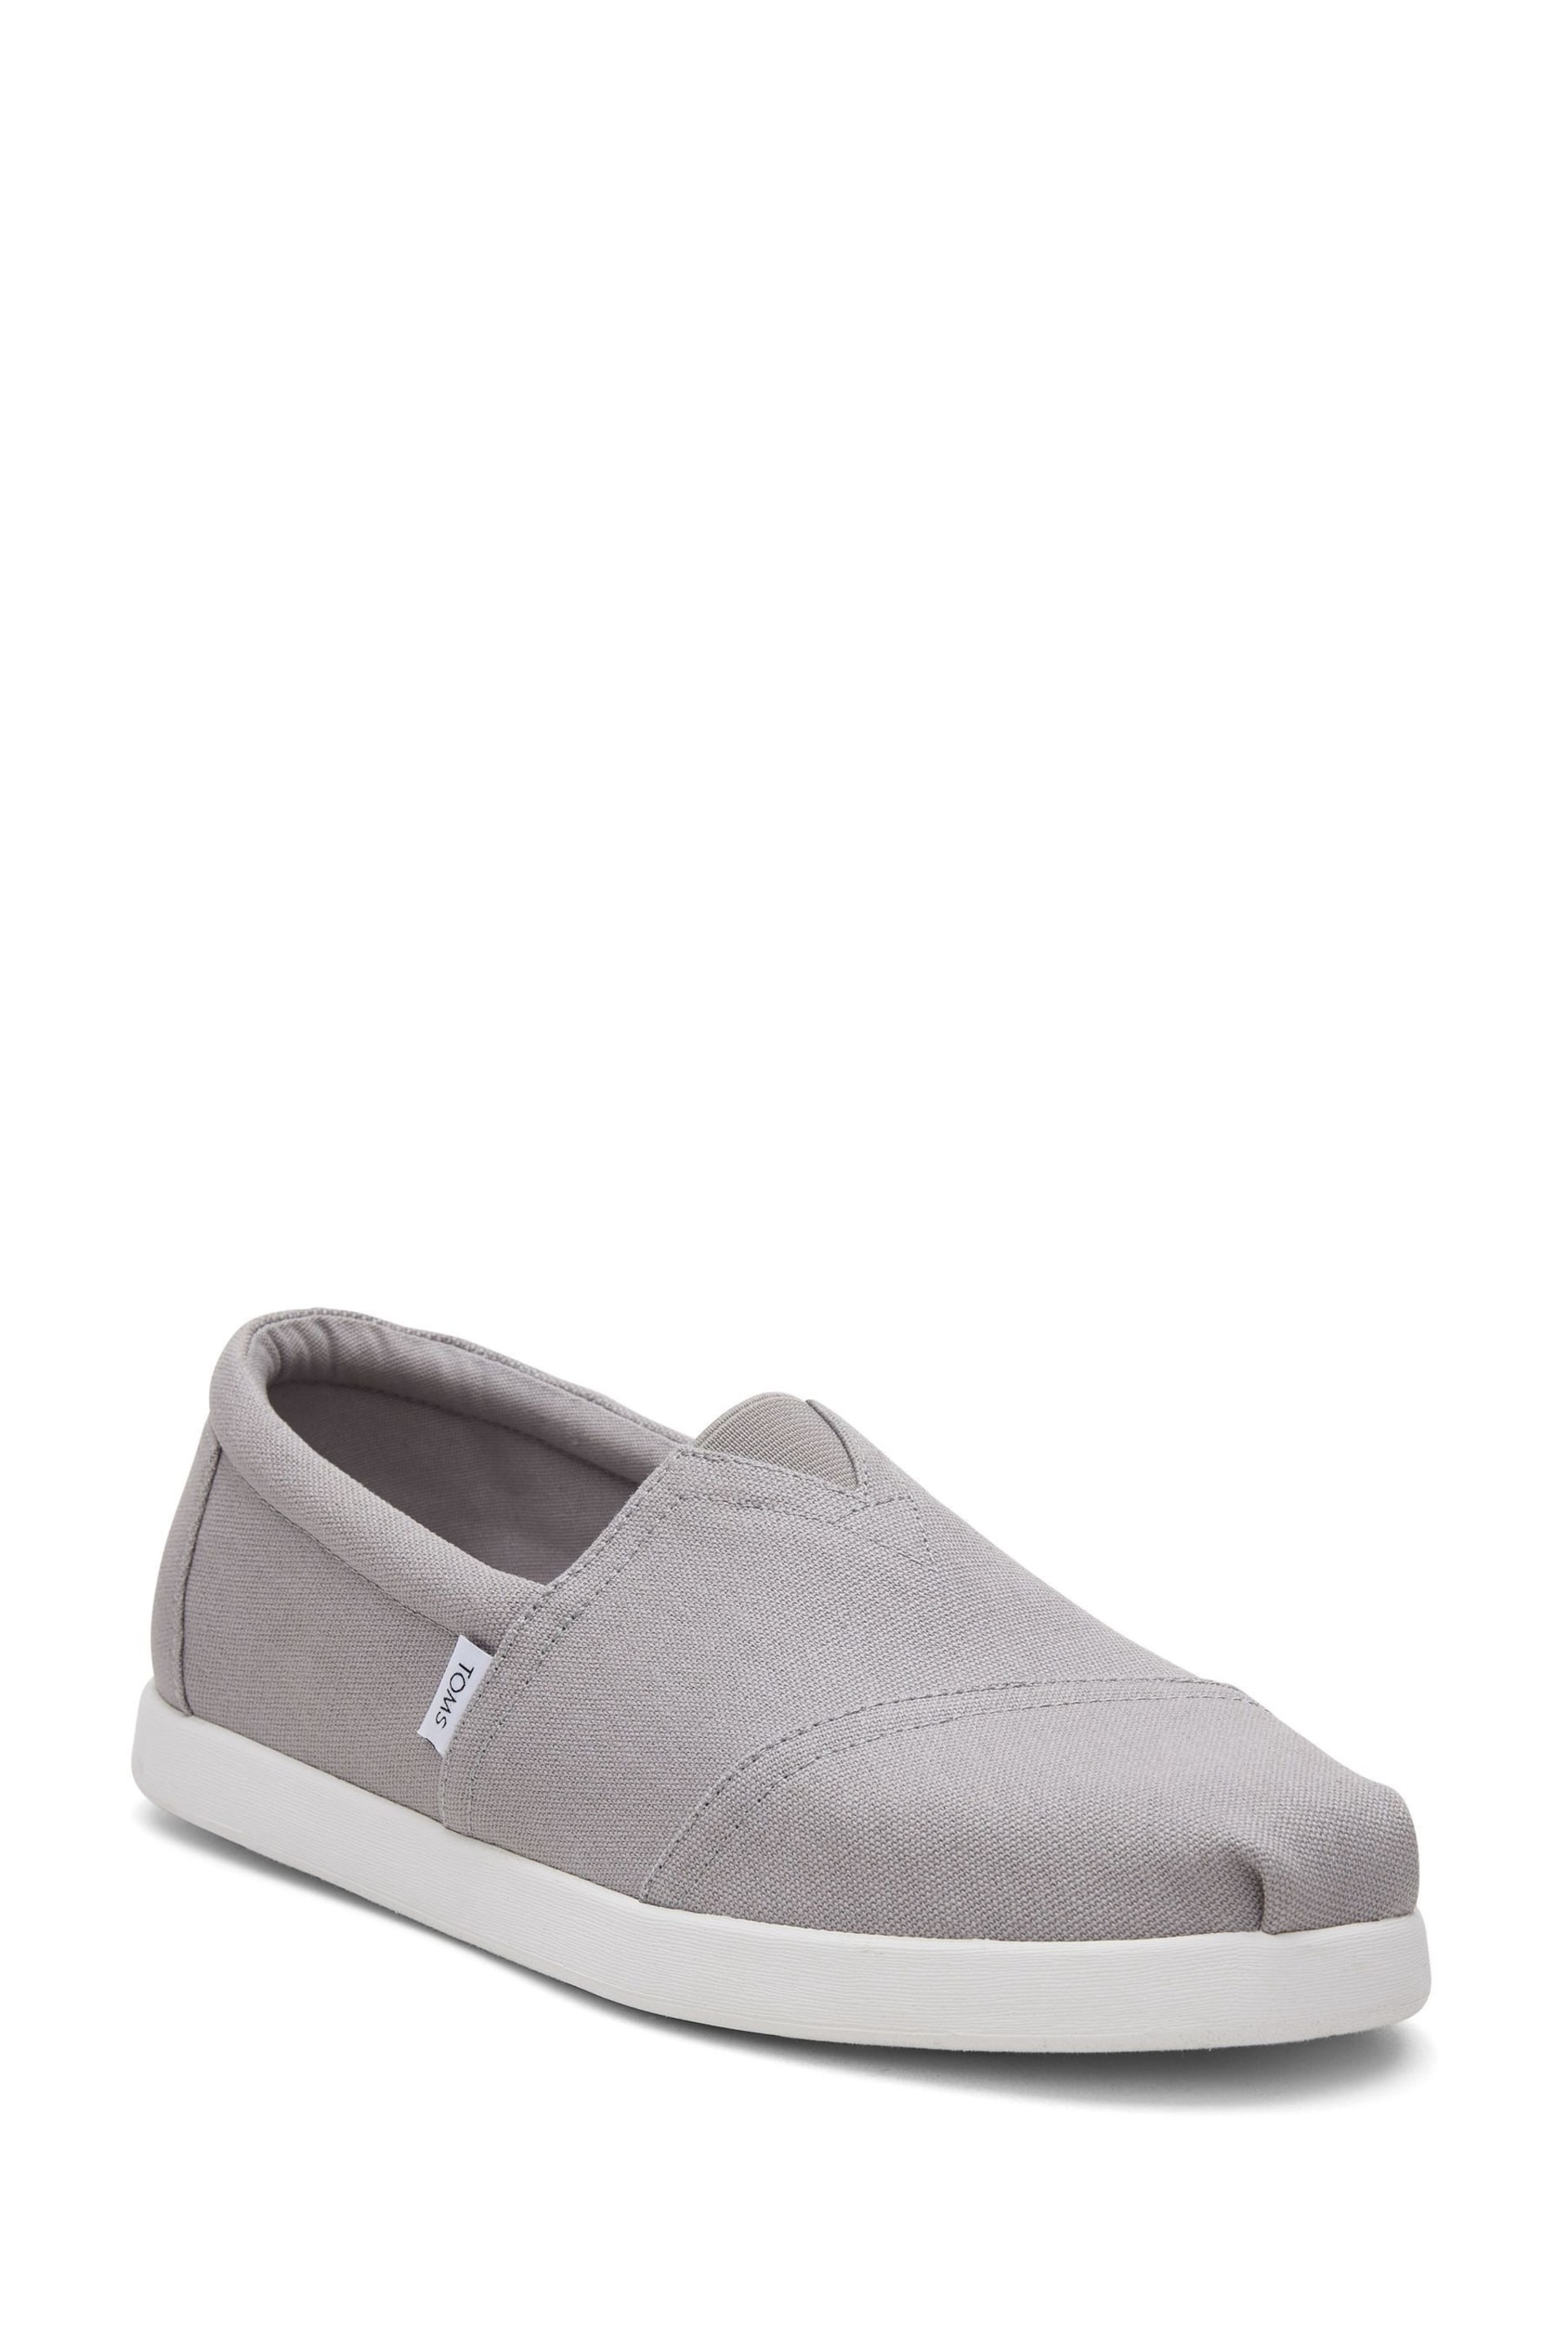 TOMS Grey Vegan Alpargata Forward Shoes In Drizzle - Image 3 of 6